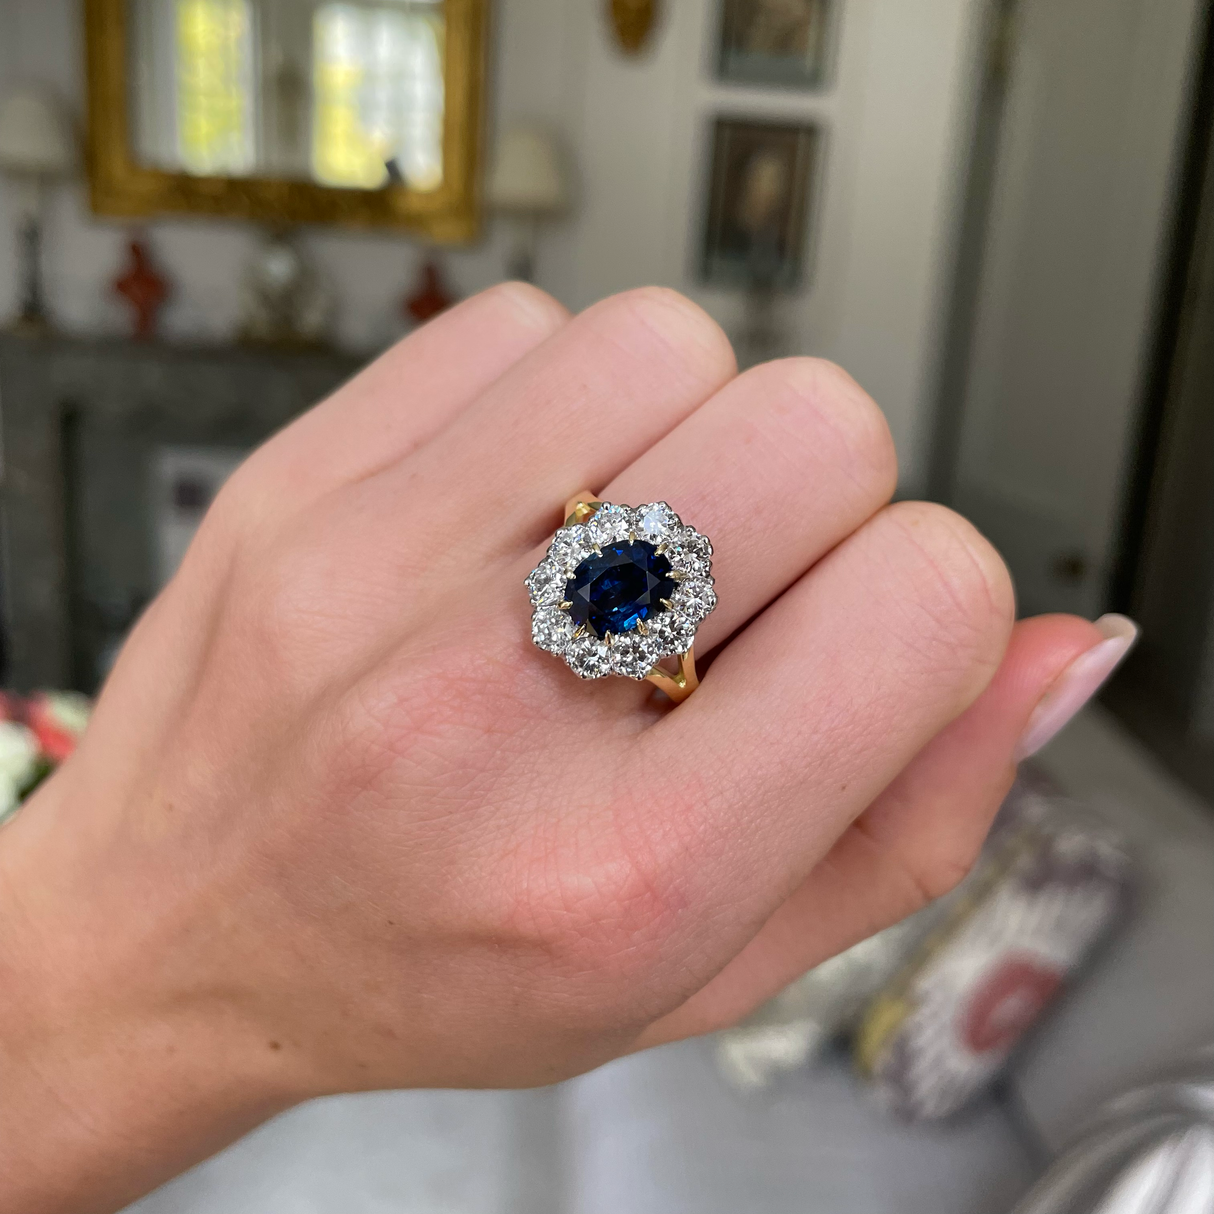 Vintage, blue sapphire & diamond cluster engagement ring, 18ct yellow gold